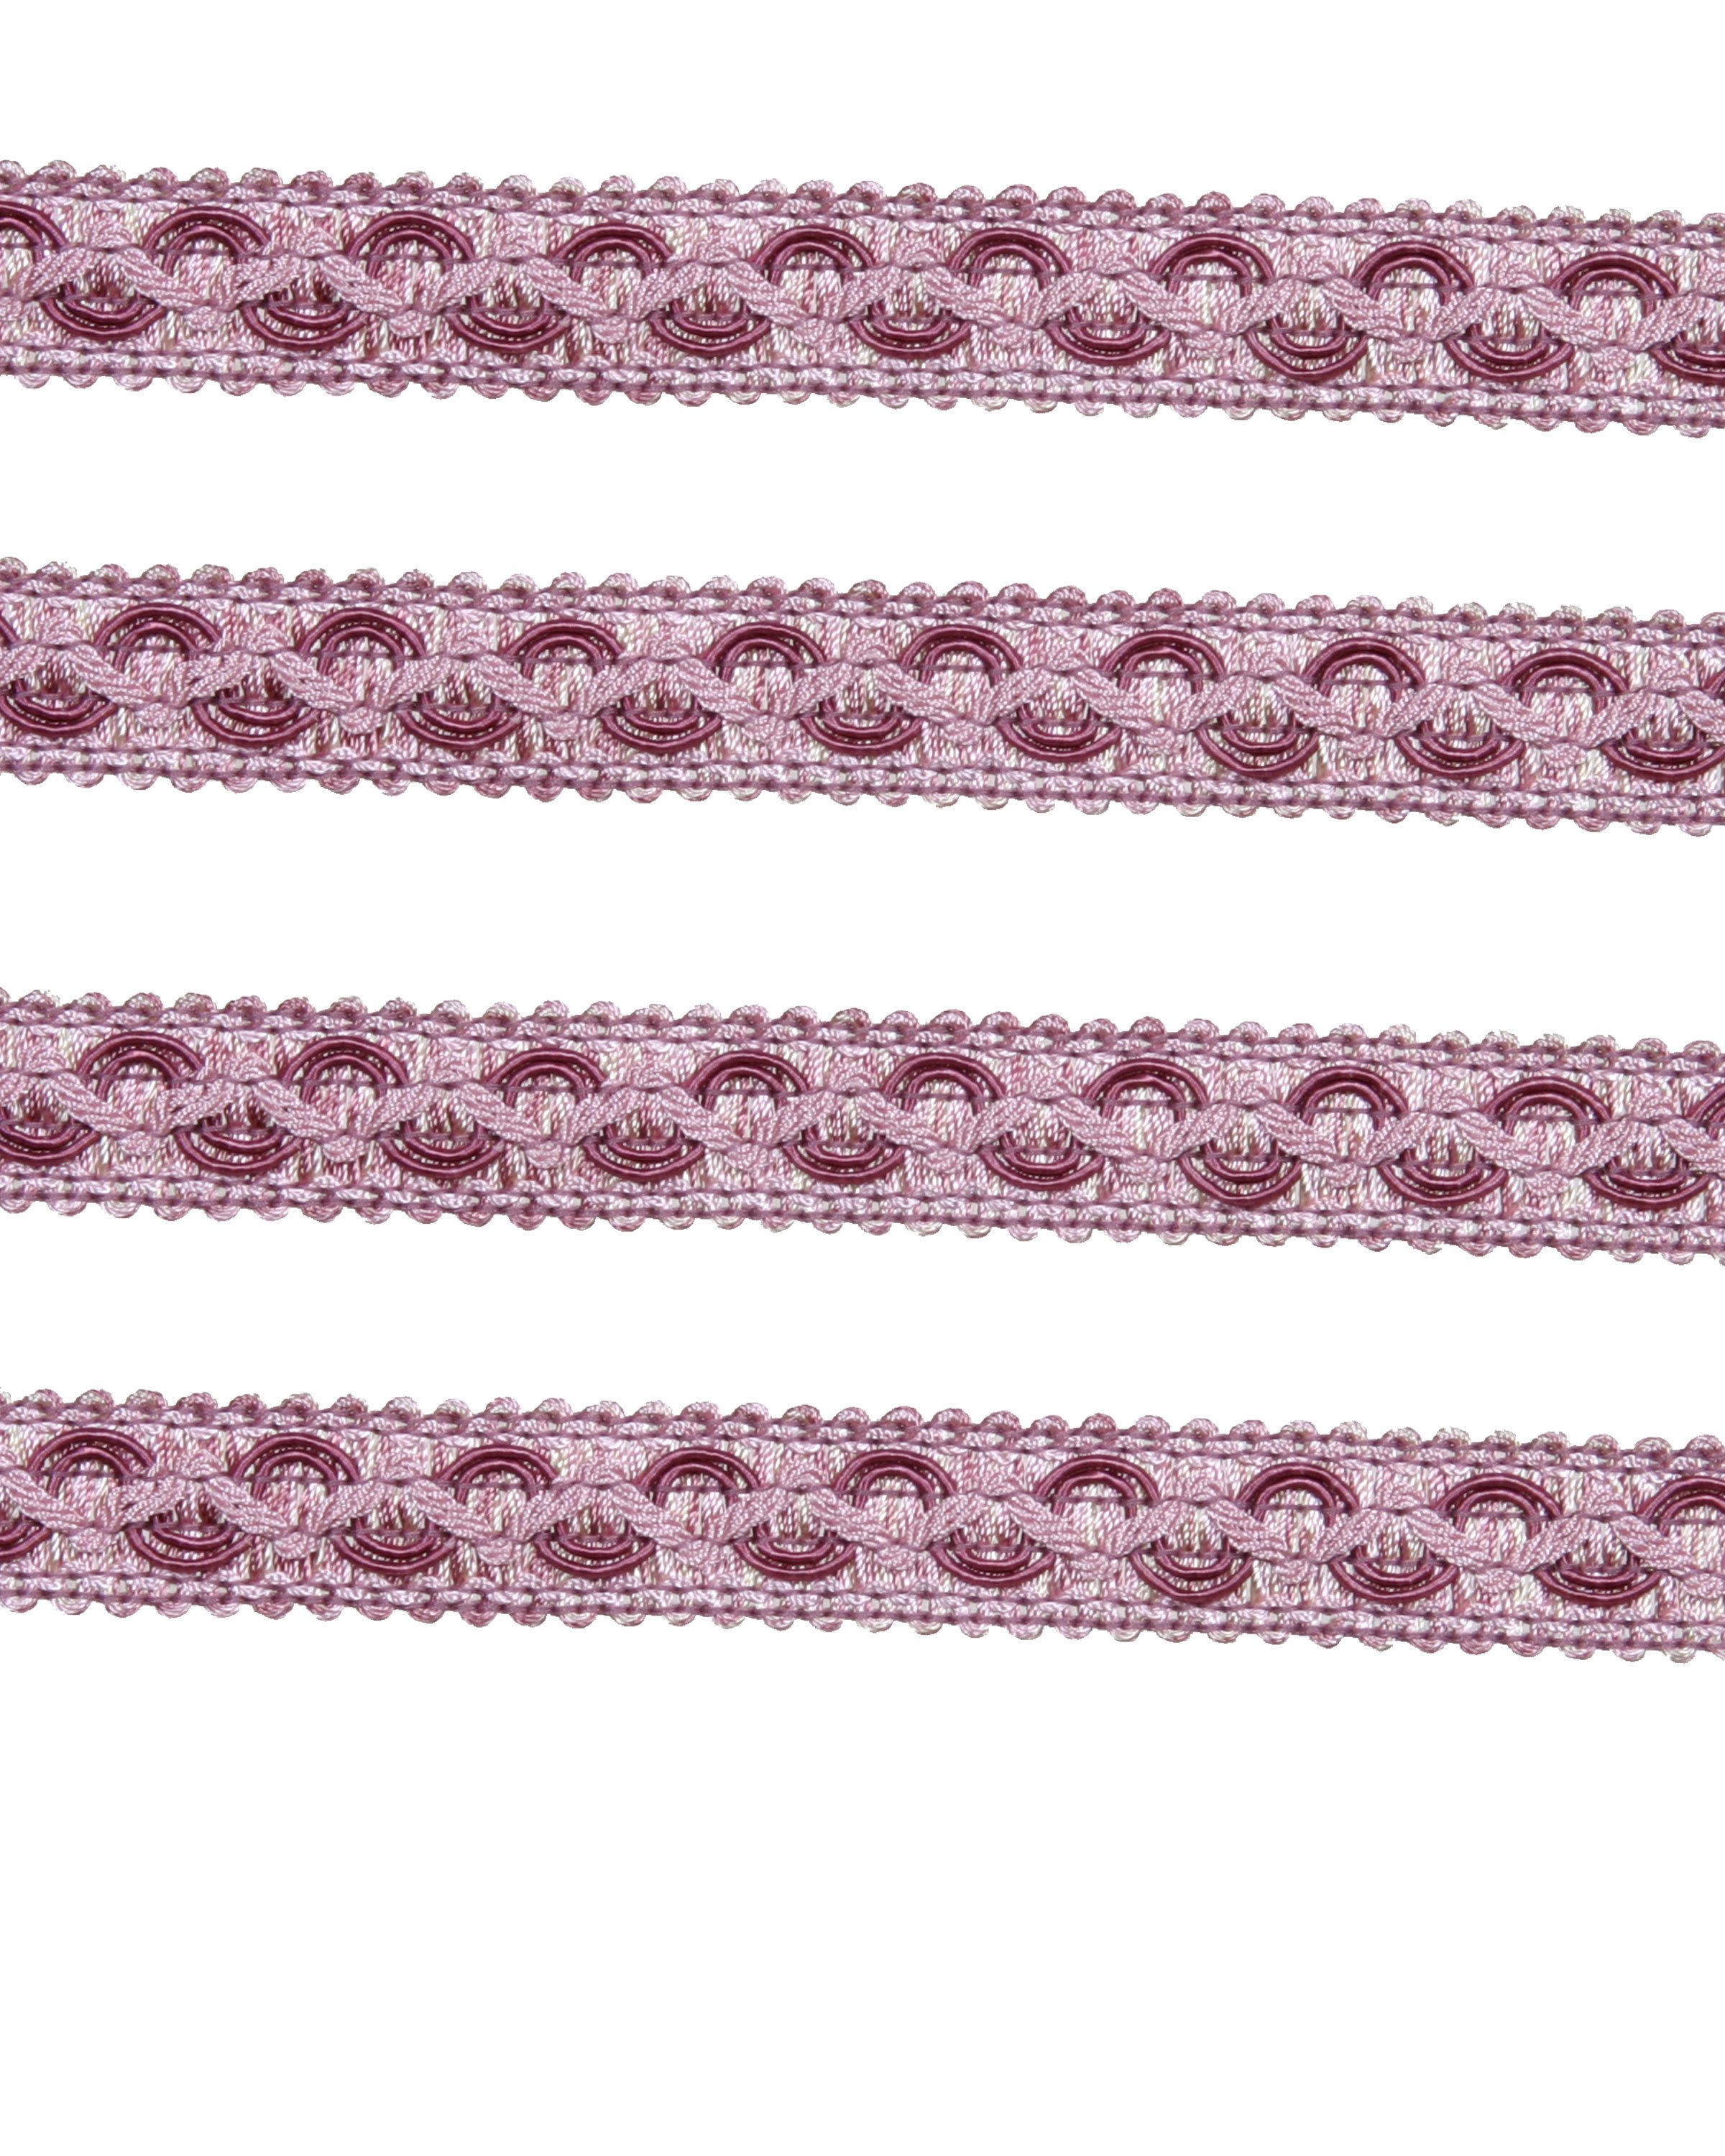 Ornate Braid - Dusky Pink 20mm Price is for 5 metres